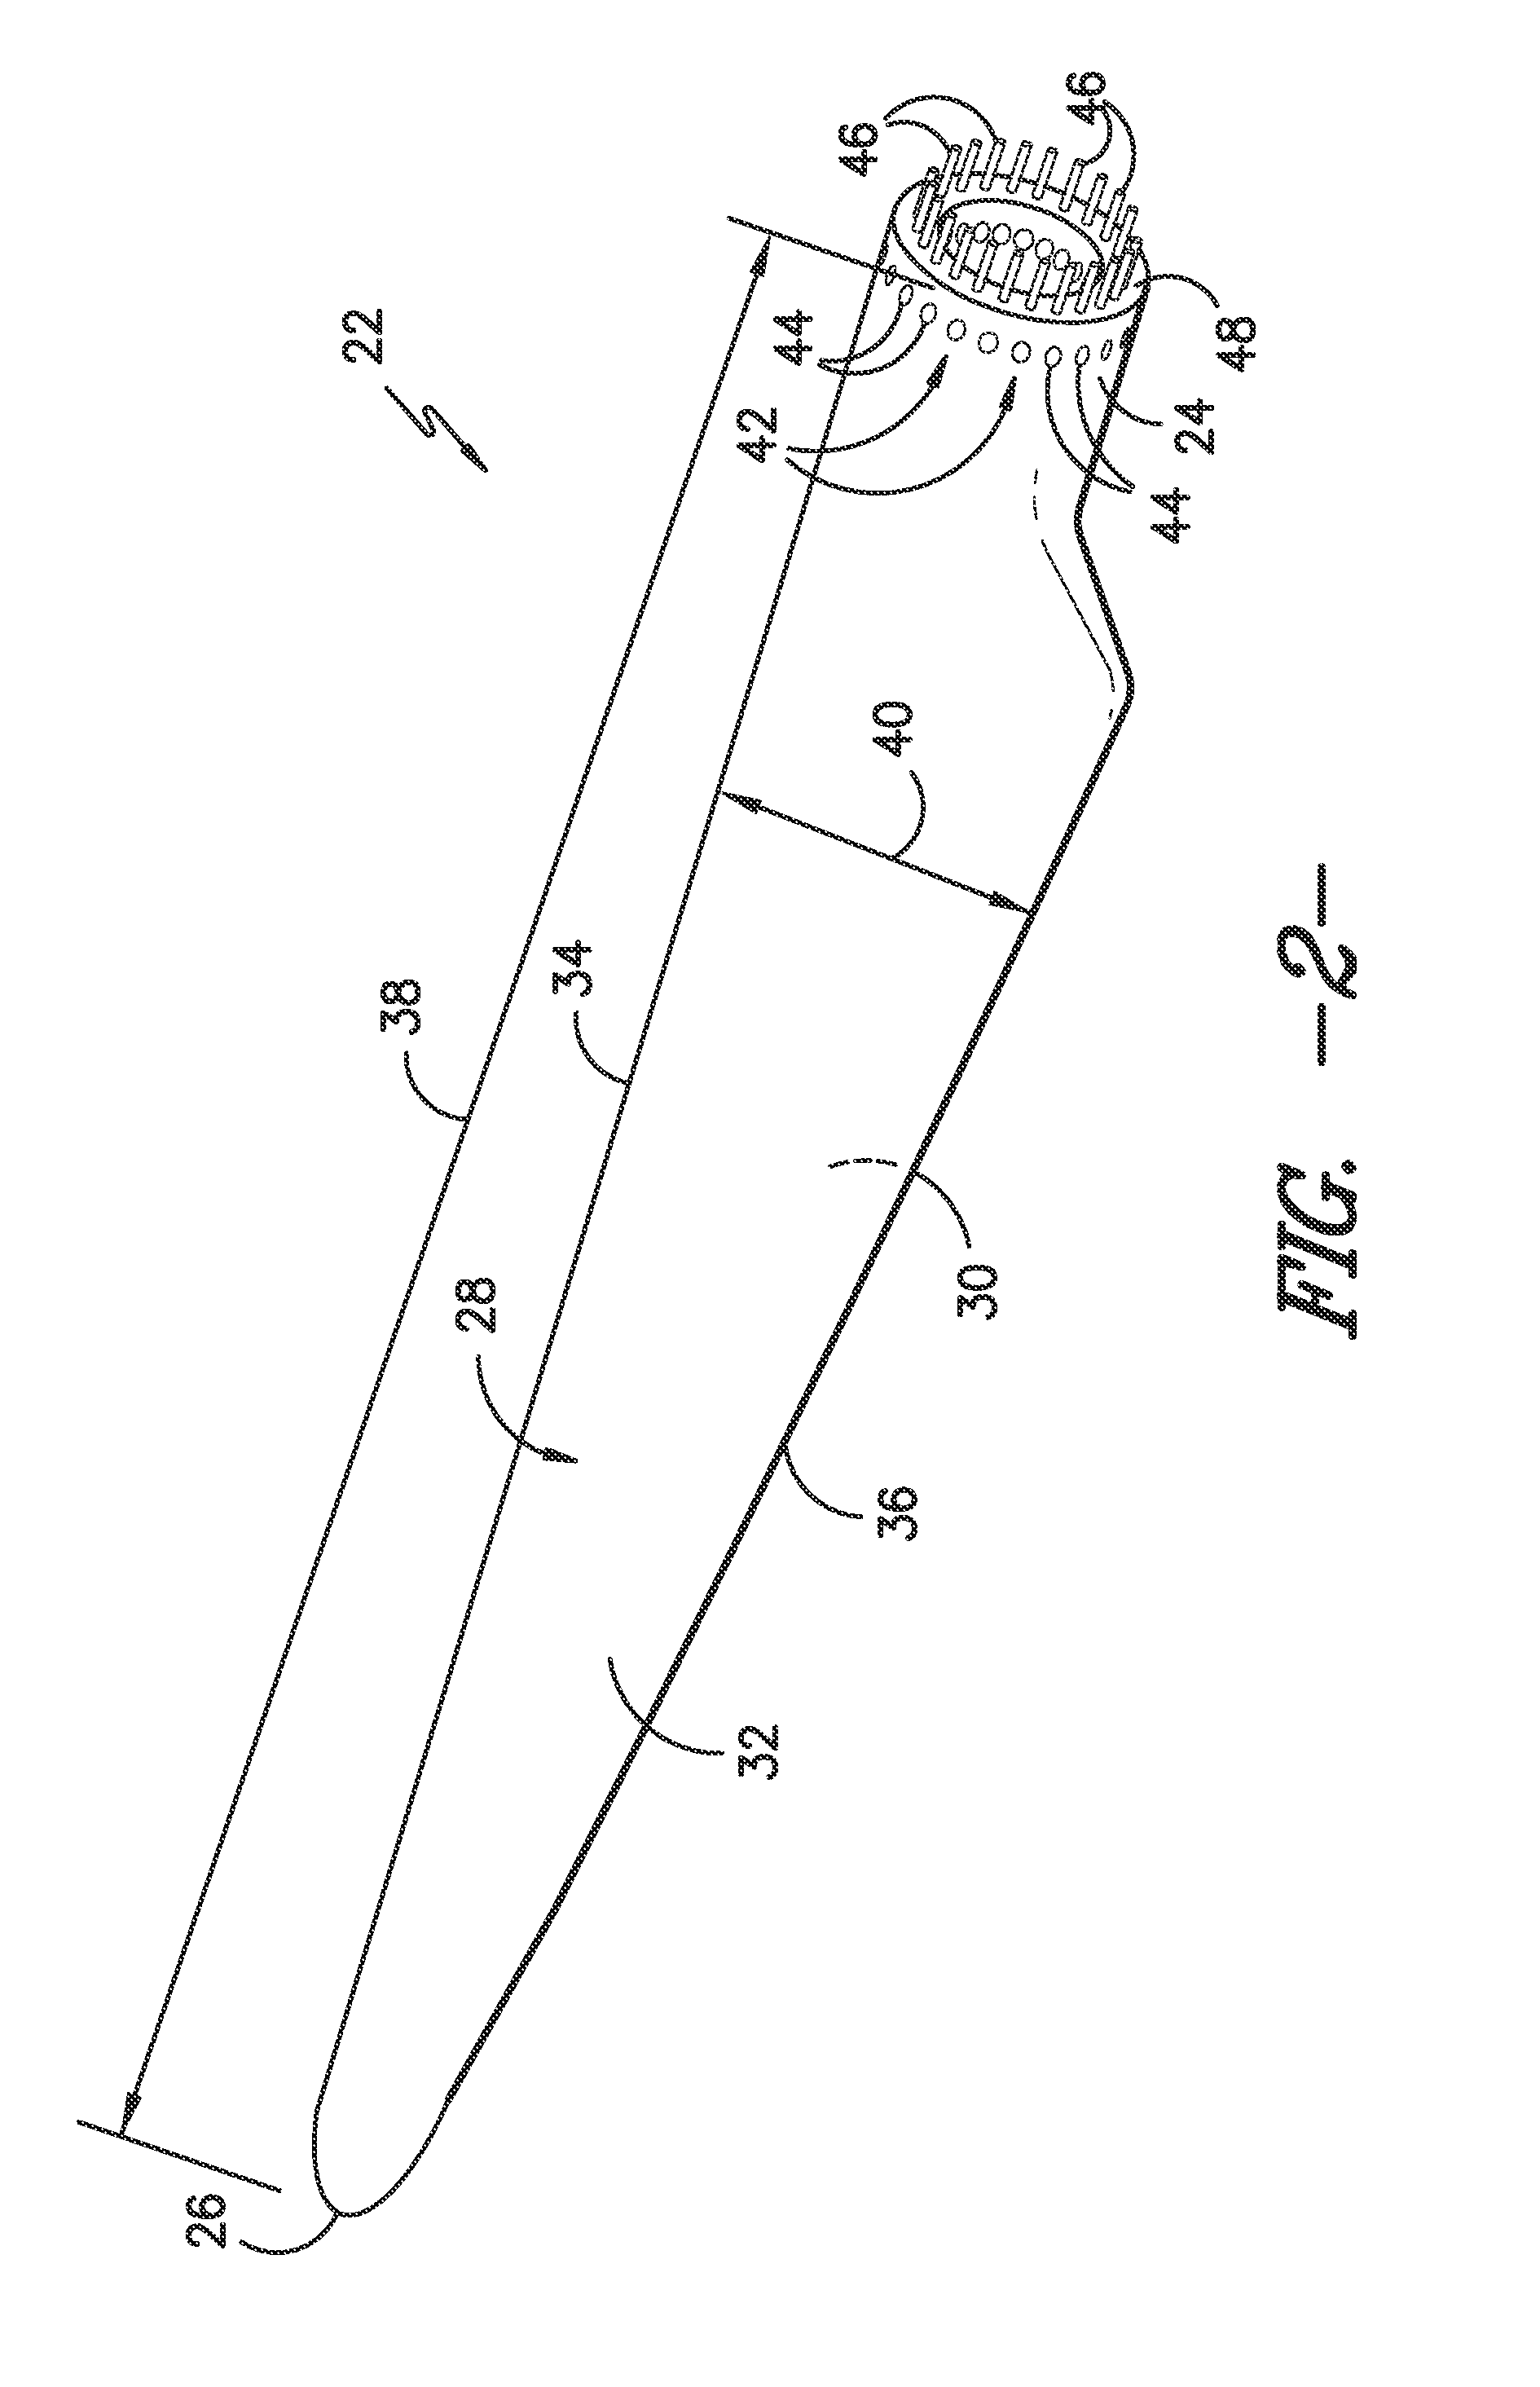 Methods and systems for removing and/or installing wind turbine rotor blades